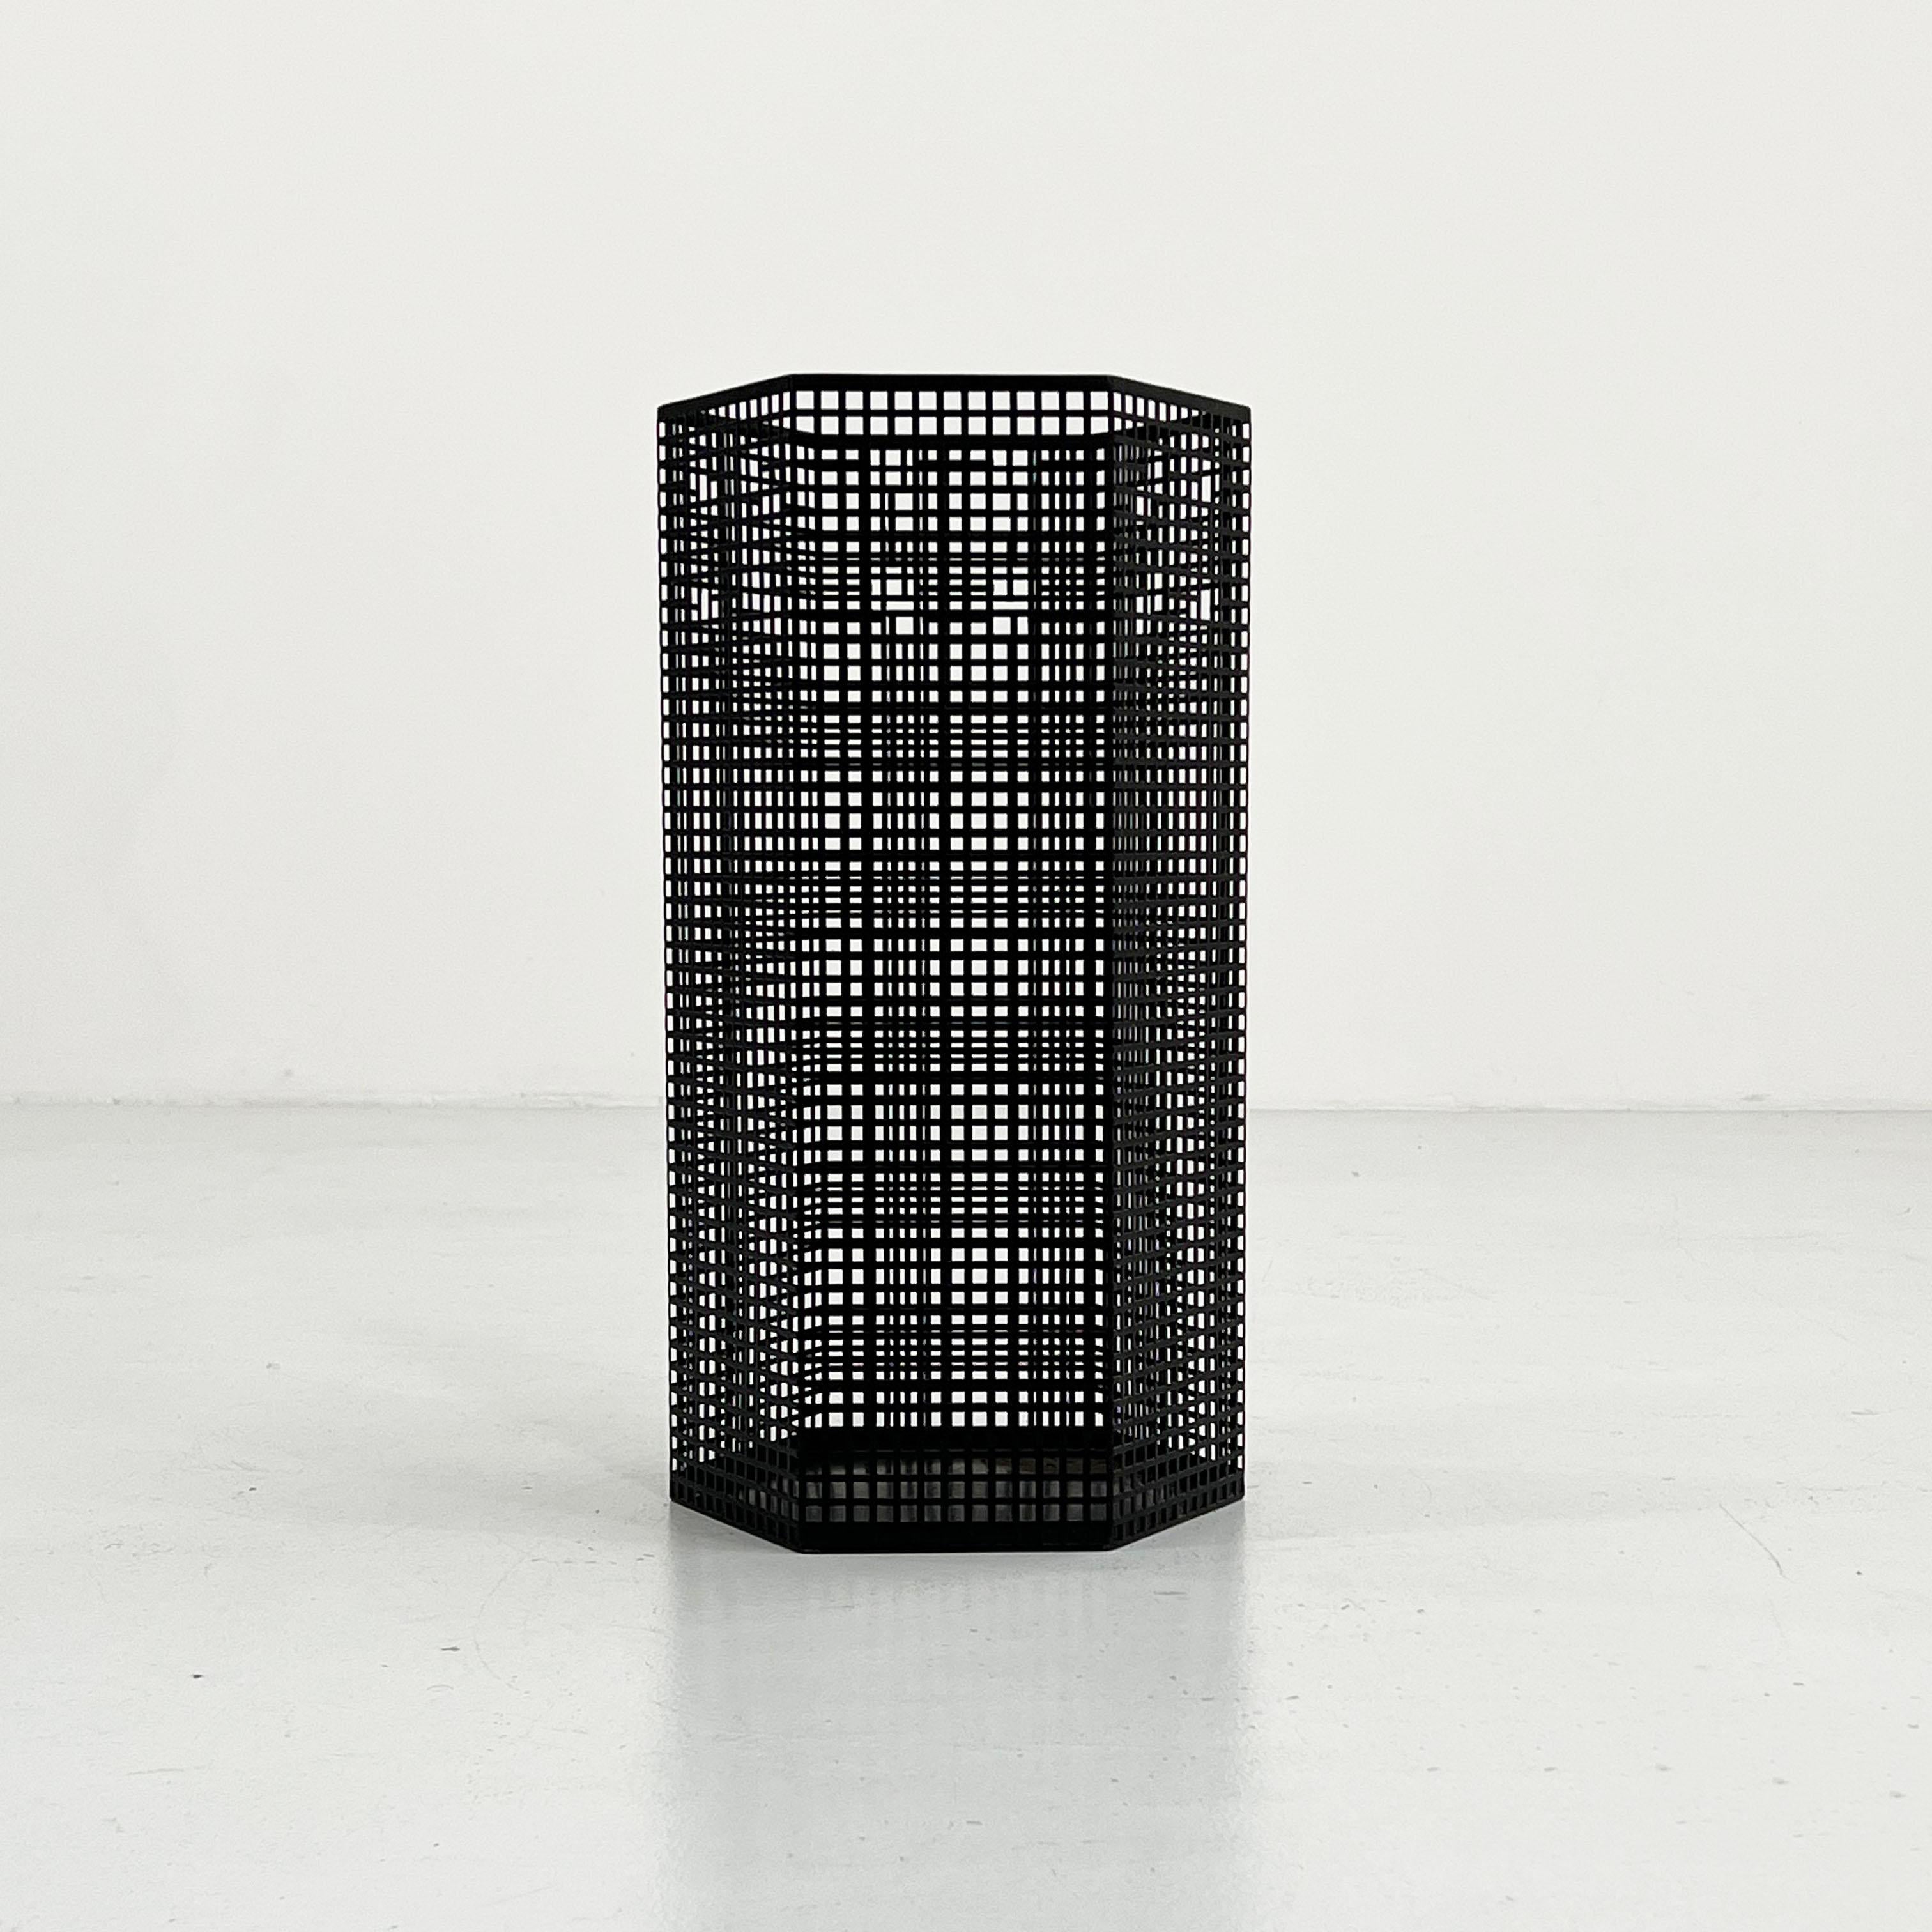 Late 20th Century Umbrella Stand or Waste Paper Basket by Josef Hoffmann for Bieffeplast, 1980s